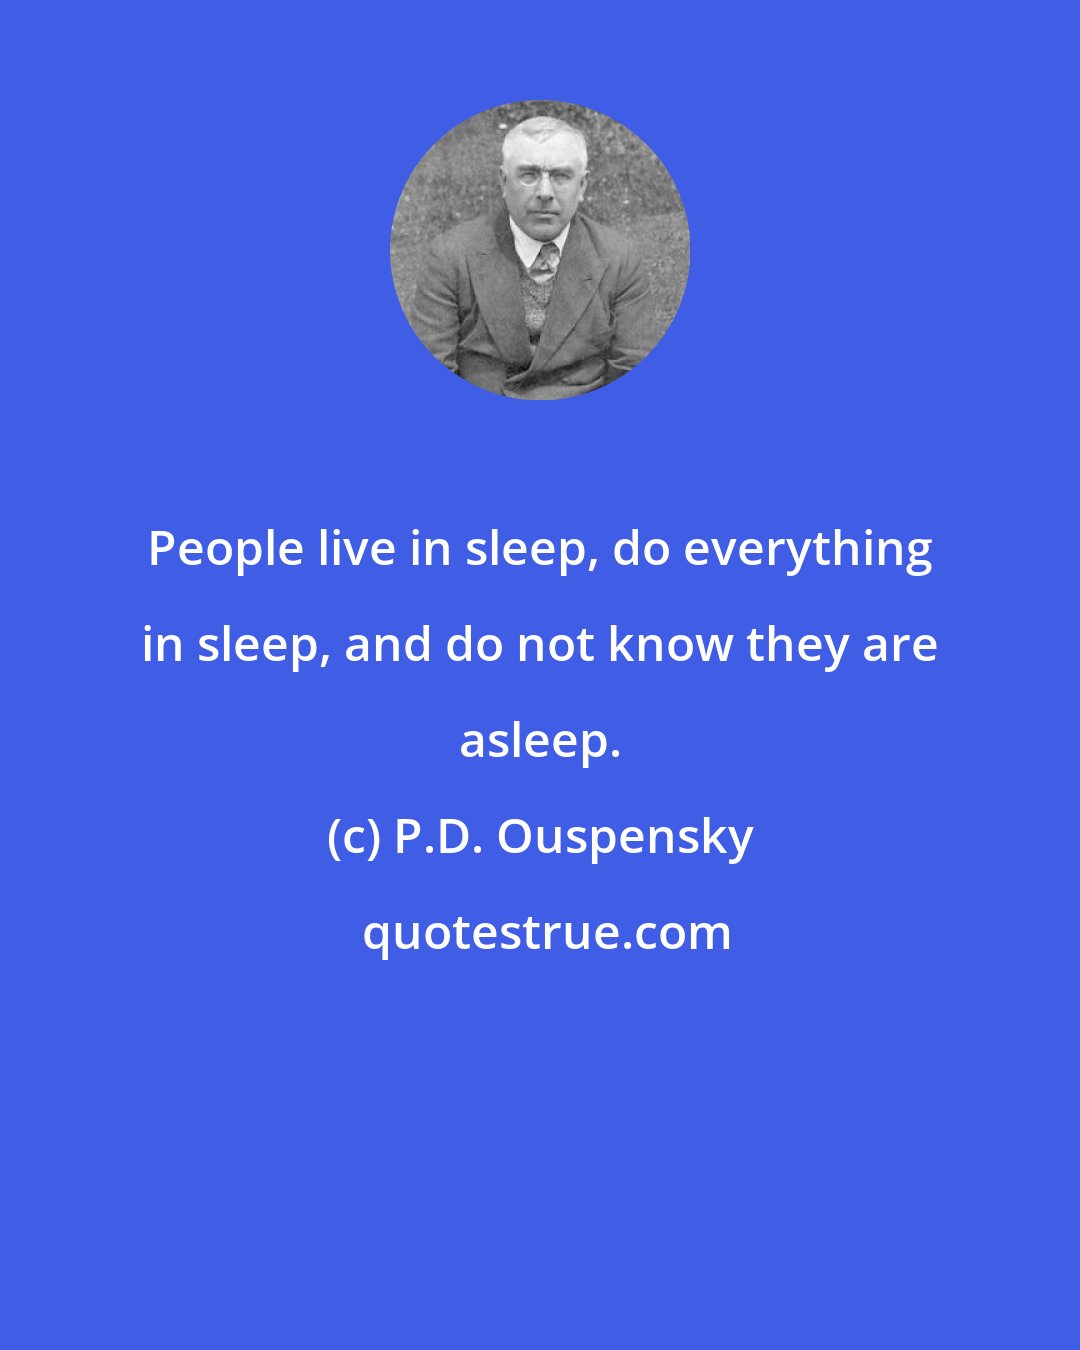 P.D. Ouspensky: People live in sleep, do everything in sleep, and do not know they are asleep.